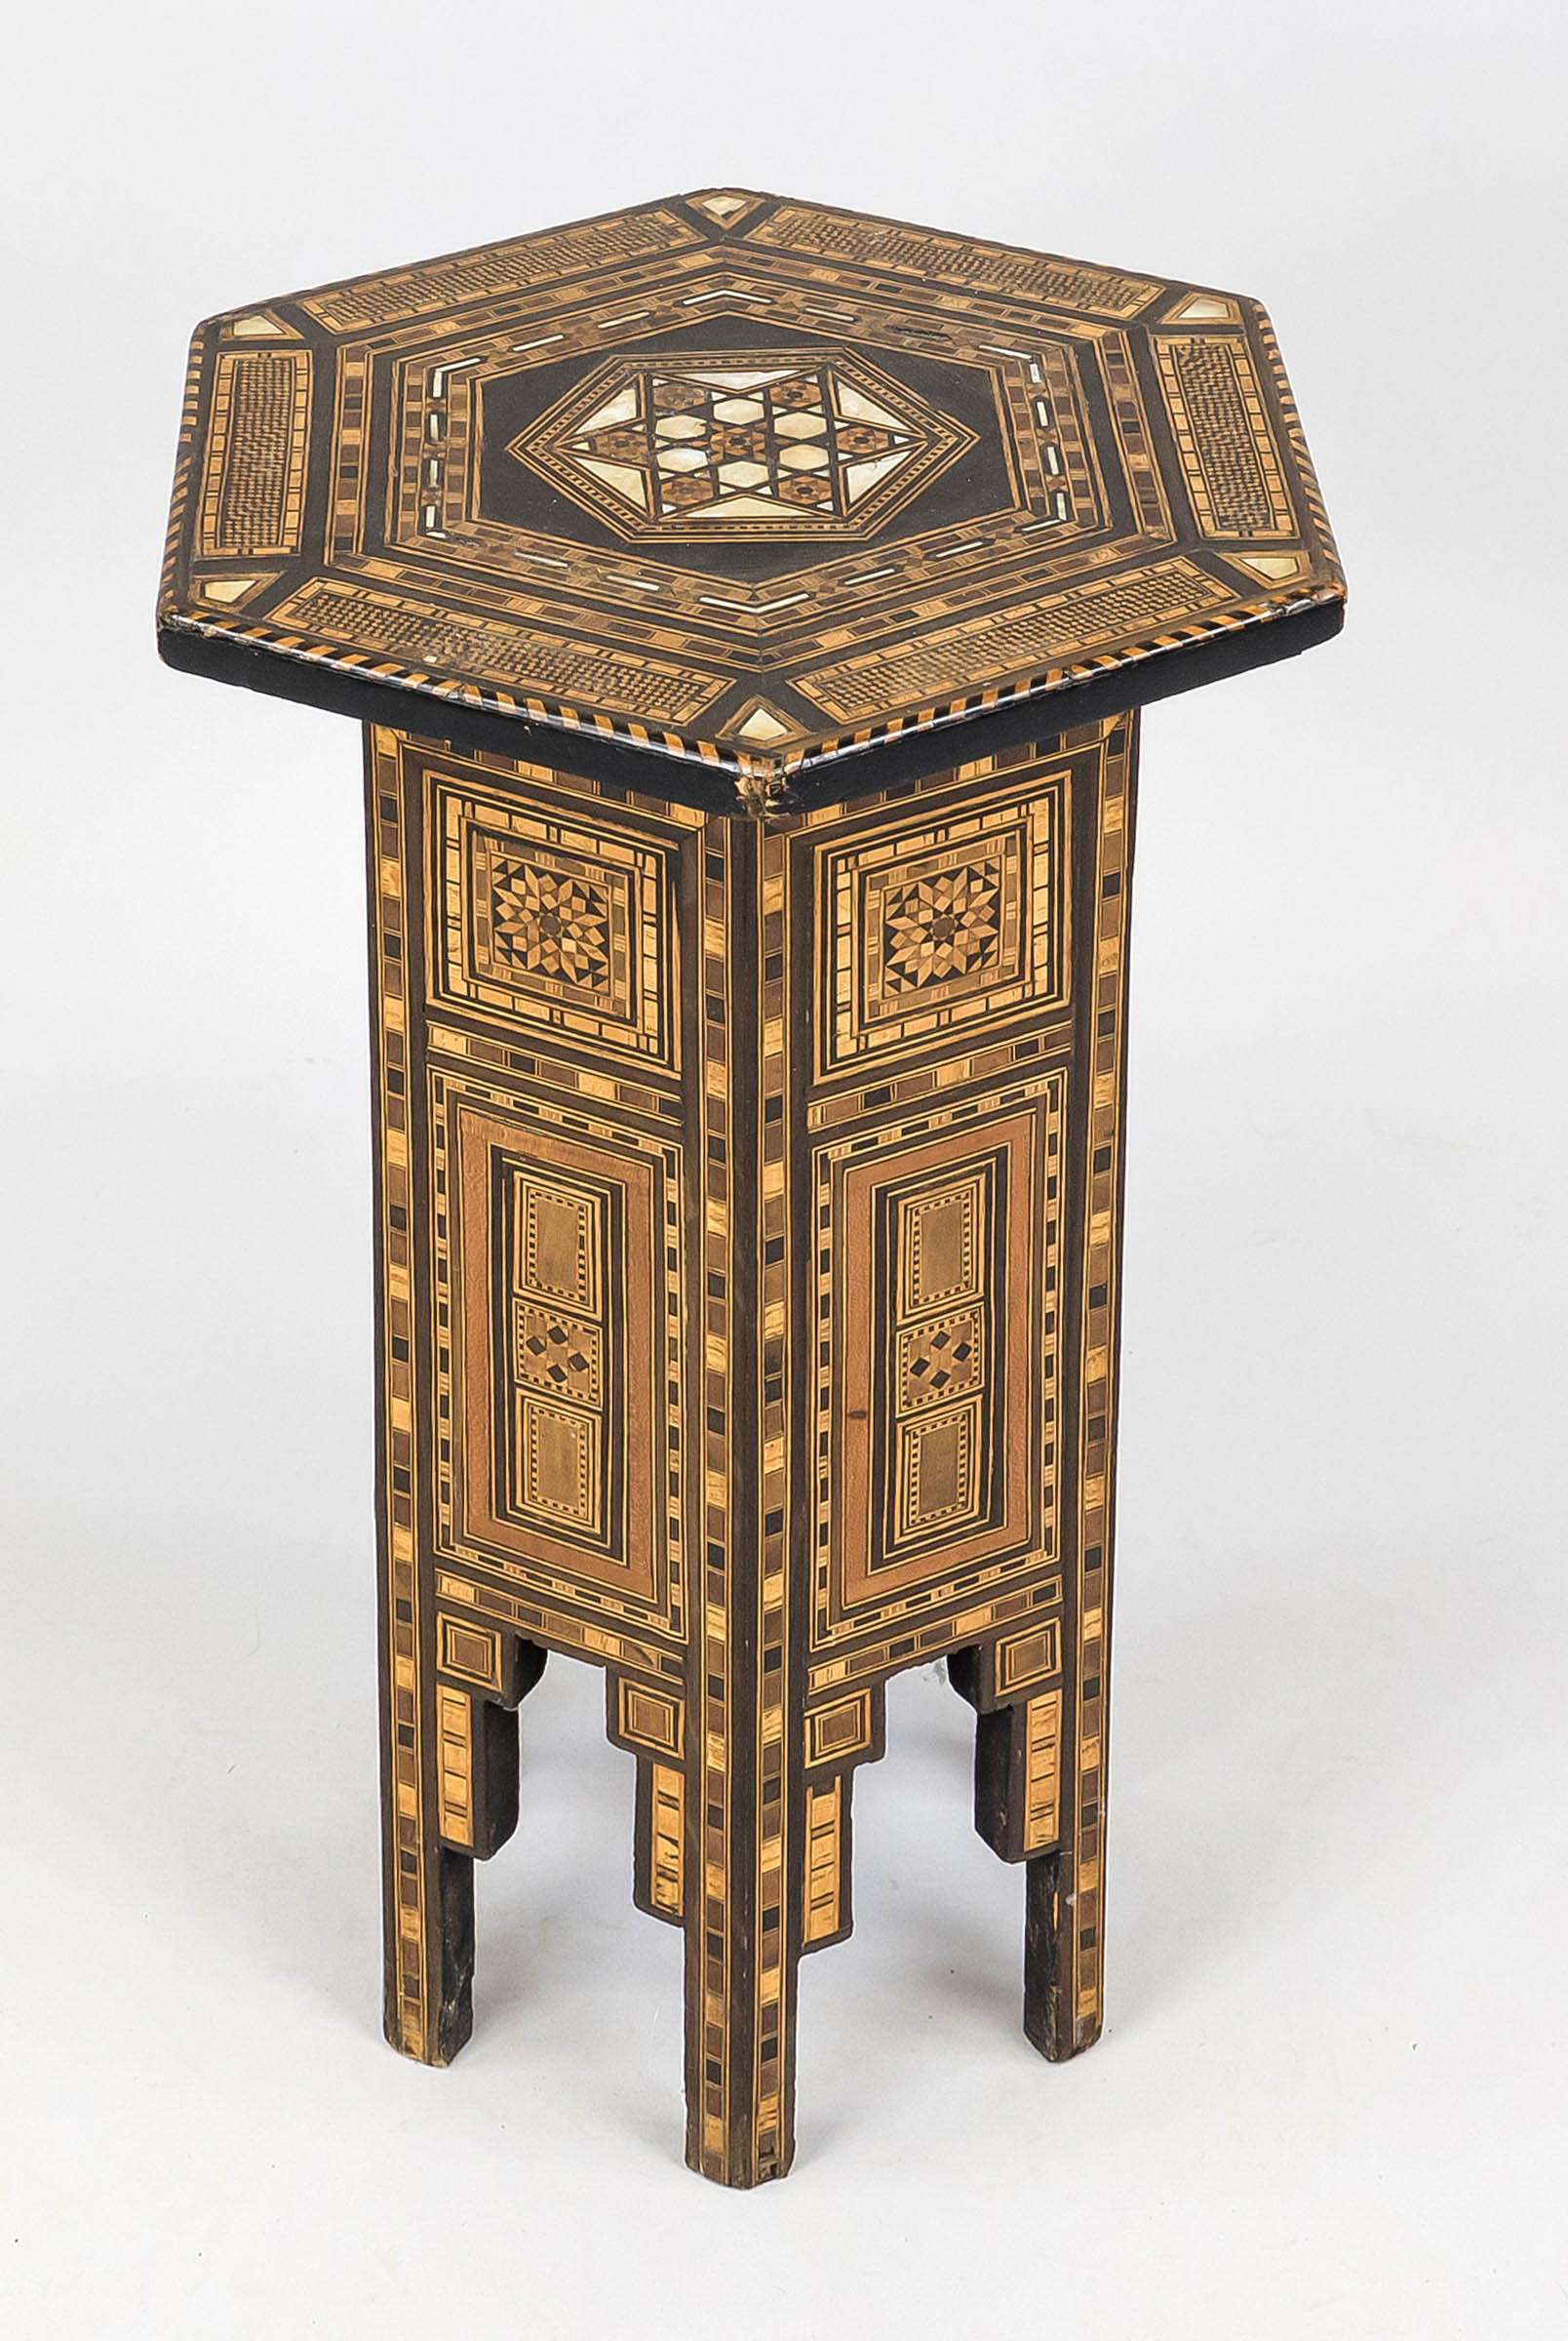 Hexagonal inlaid table, oriental (probably Egyptian) 1st half 20th century, various woods and